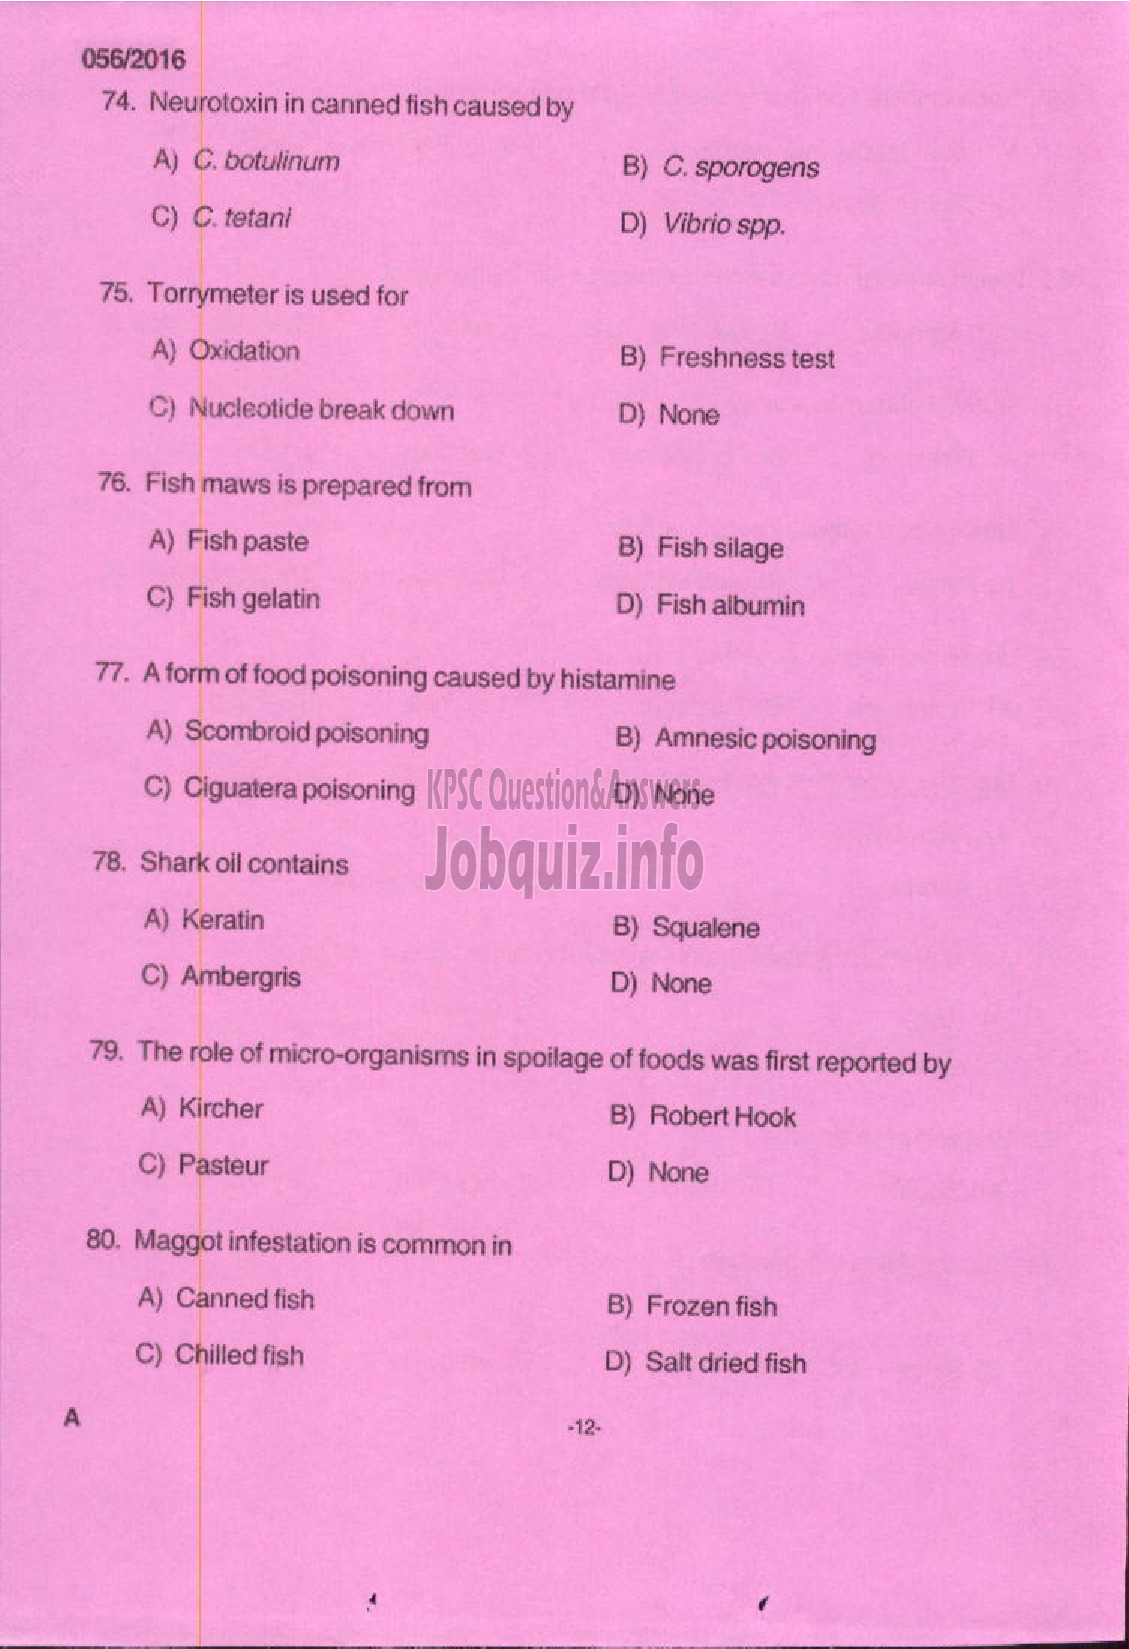 Kerala PSC Question Paper - OTHER RESEARCH ASSISTANT CHEMISTRY FISHERIES-10